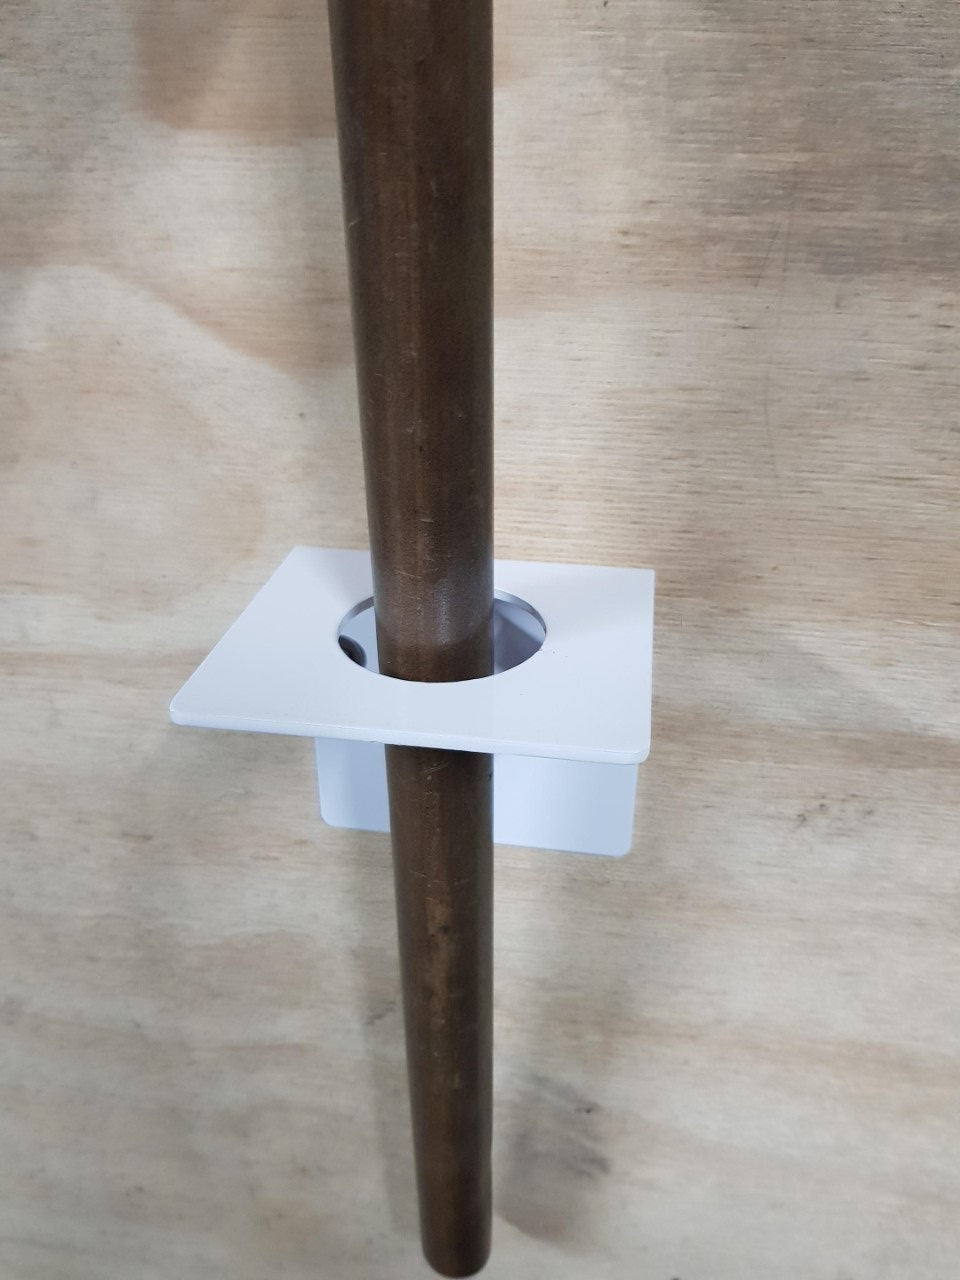 a metal pole with a hole in the middle of it